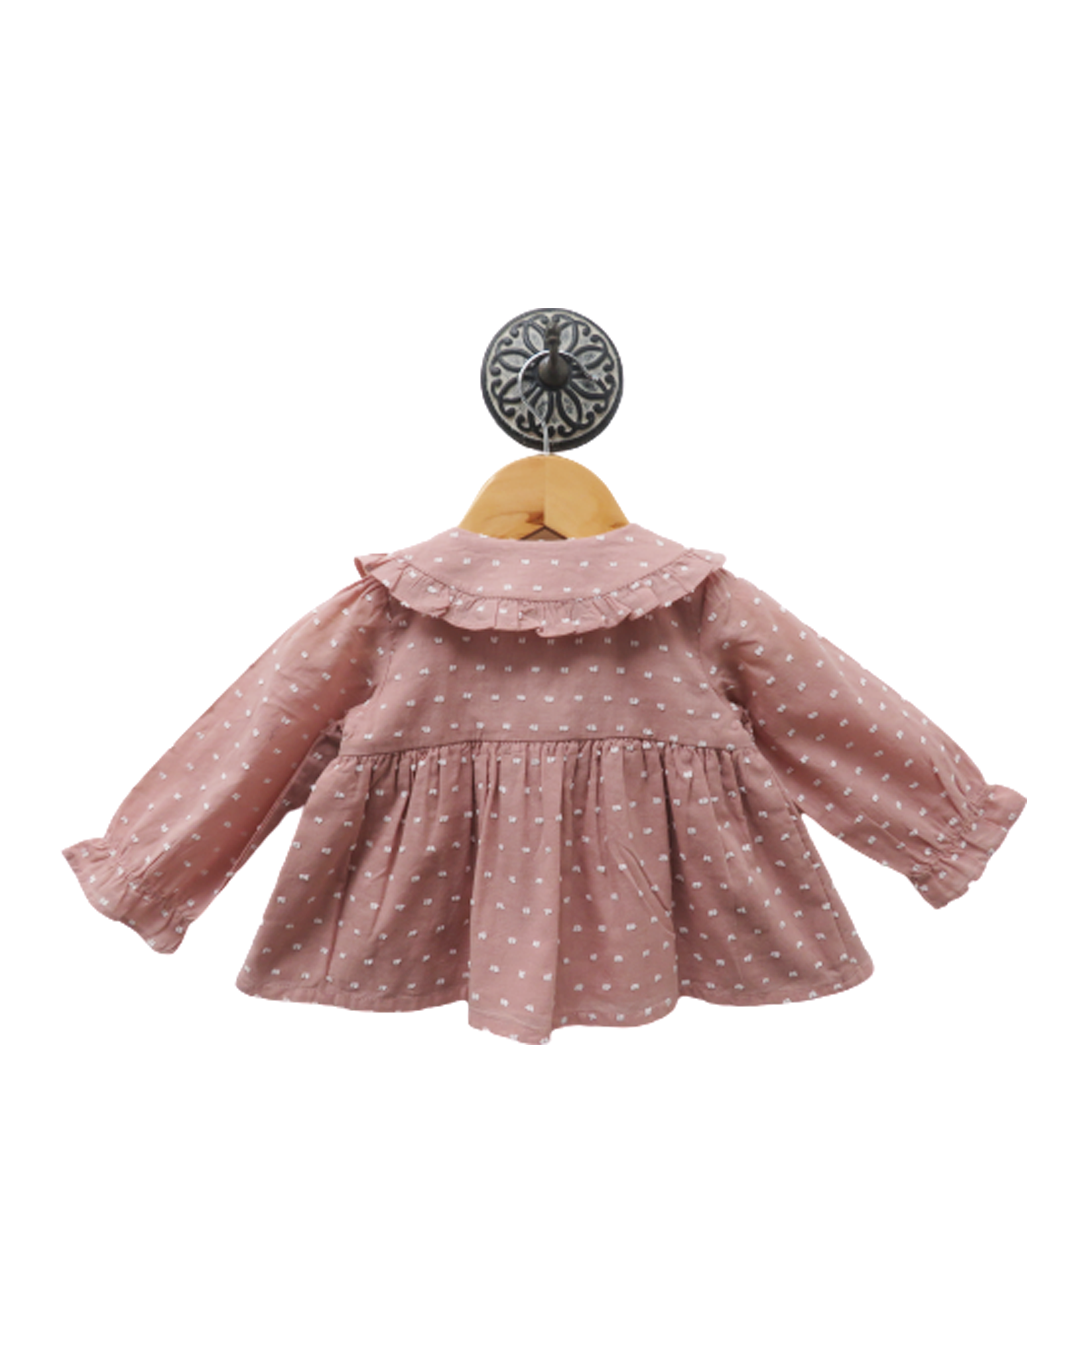 Dobby Dress With Frilly Collar And Bow